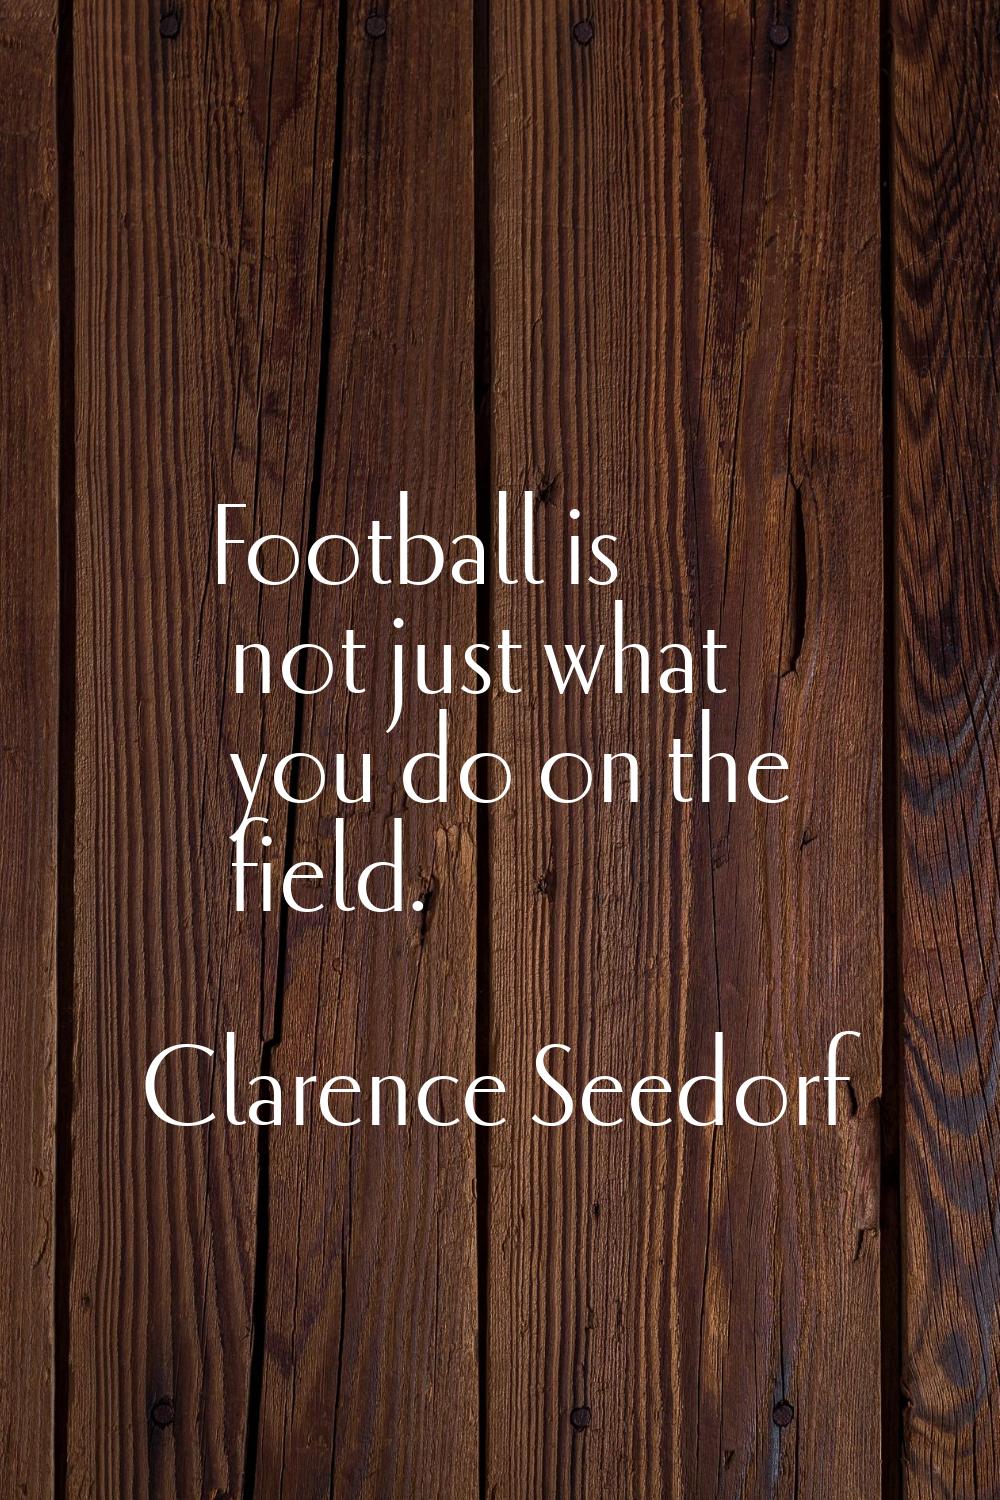 Football is not just what you do on the field.